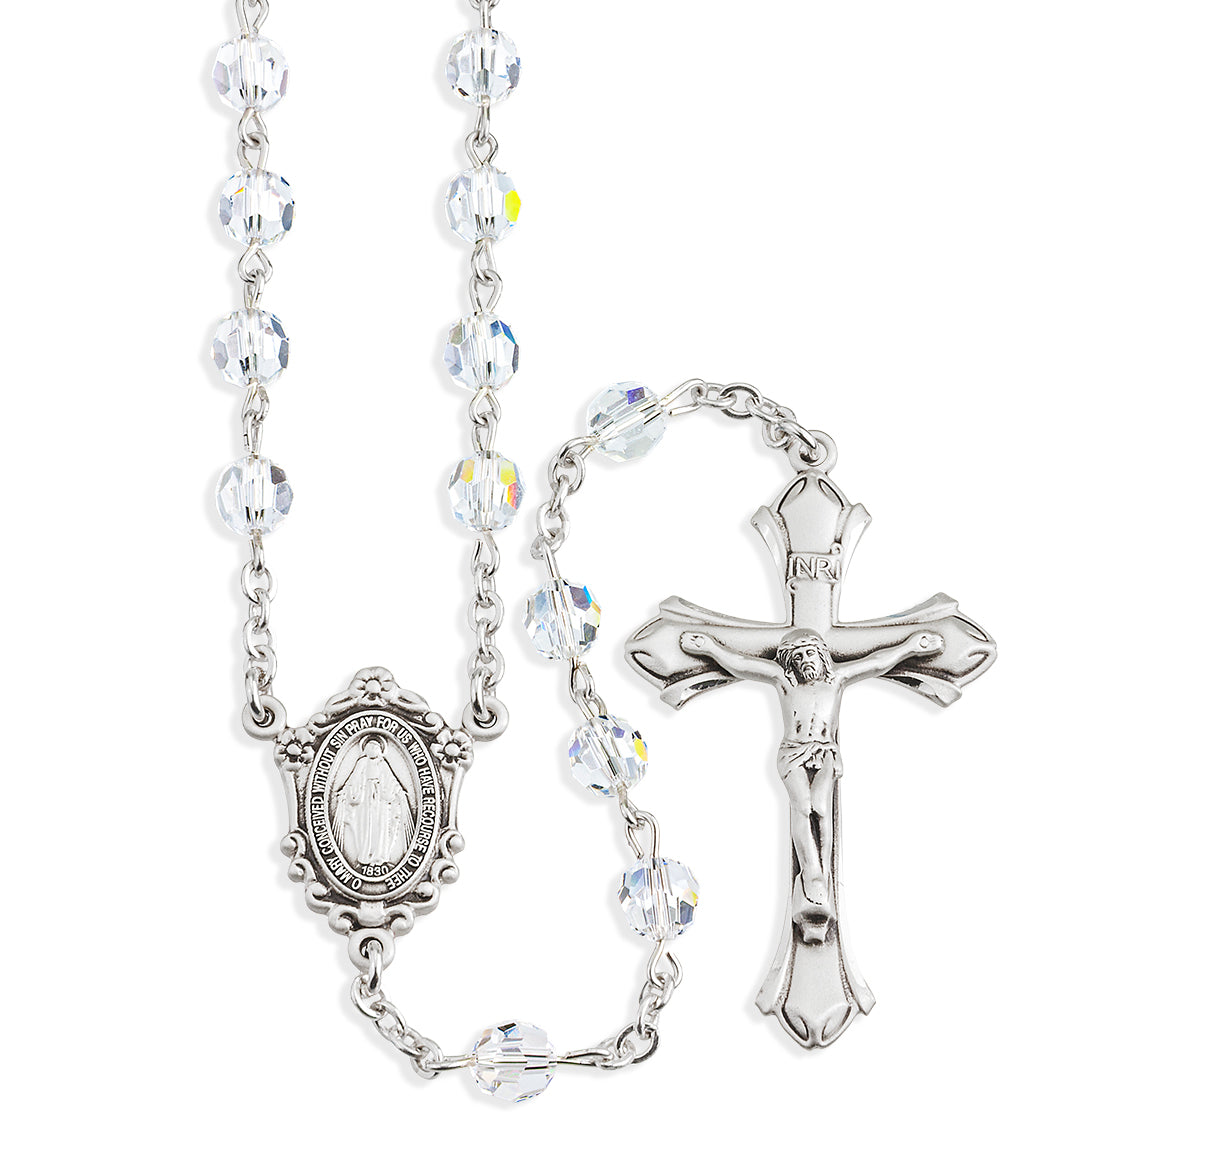 Sterling Silver Rosary Hand Made with Swarovski Crystal 6mm Clear Faceted Round Beads by HMH